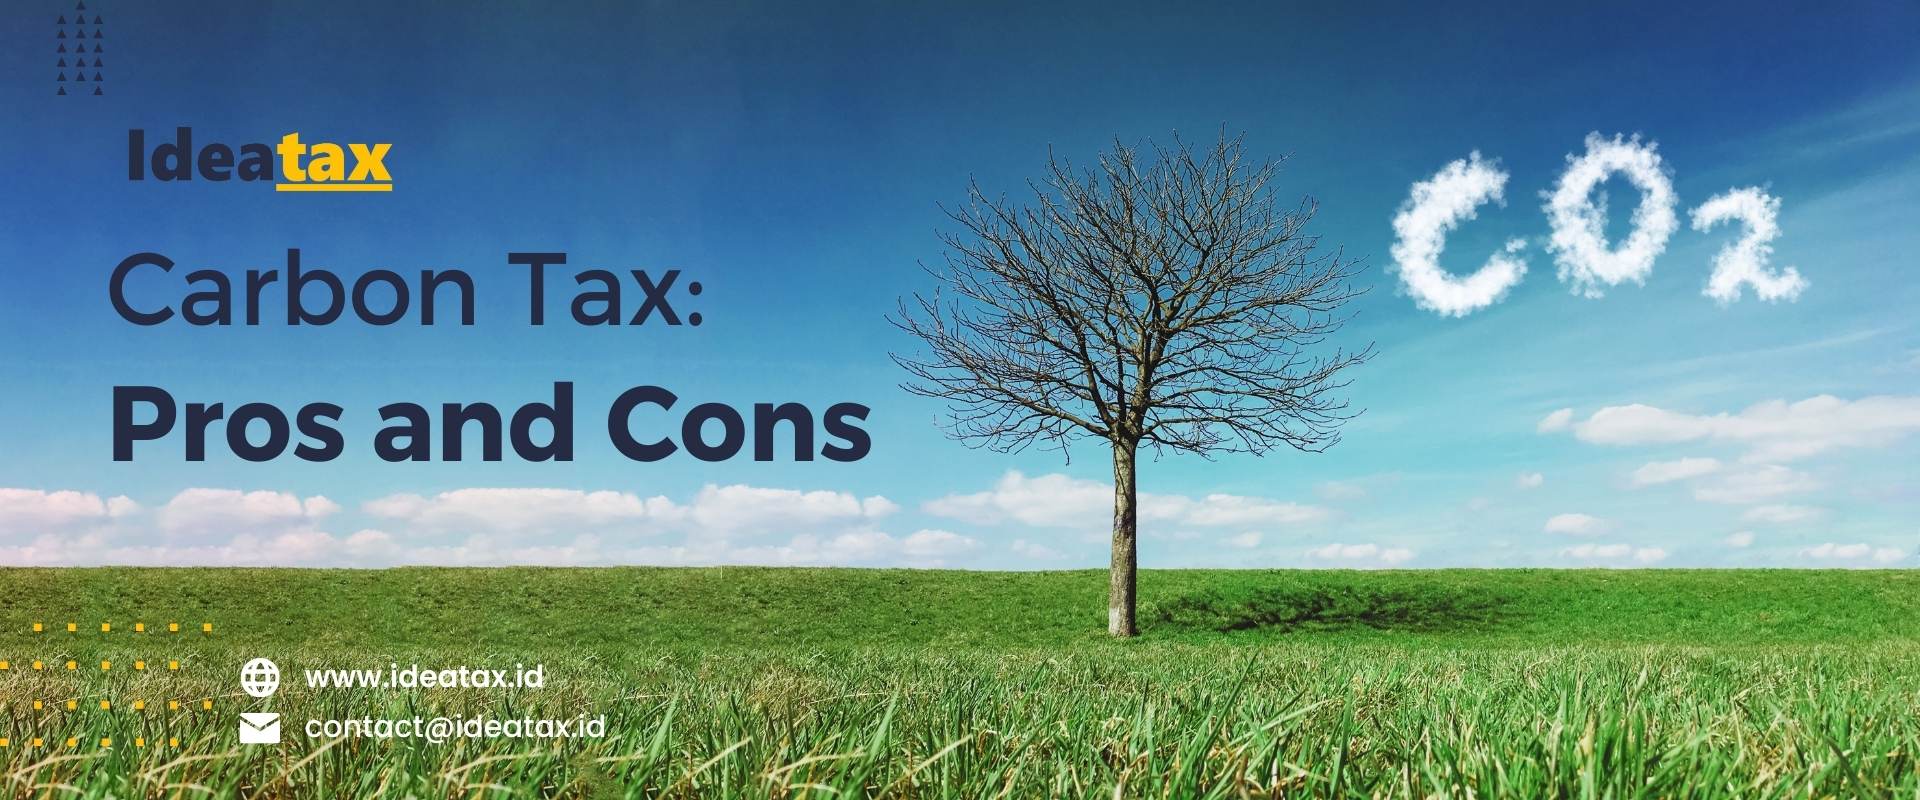 Carbon Tax: Pros and Cons